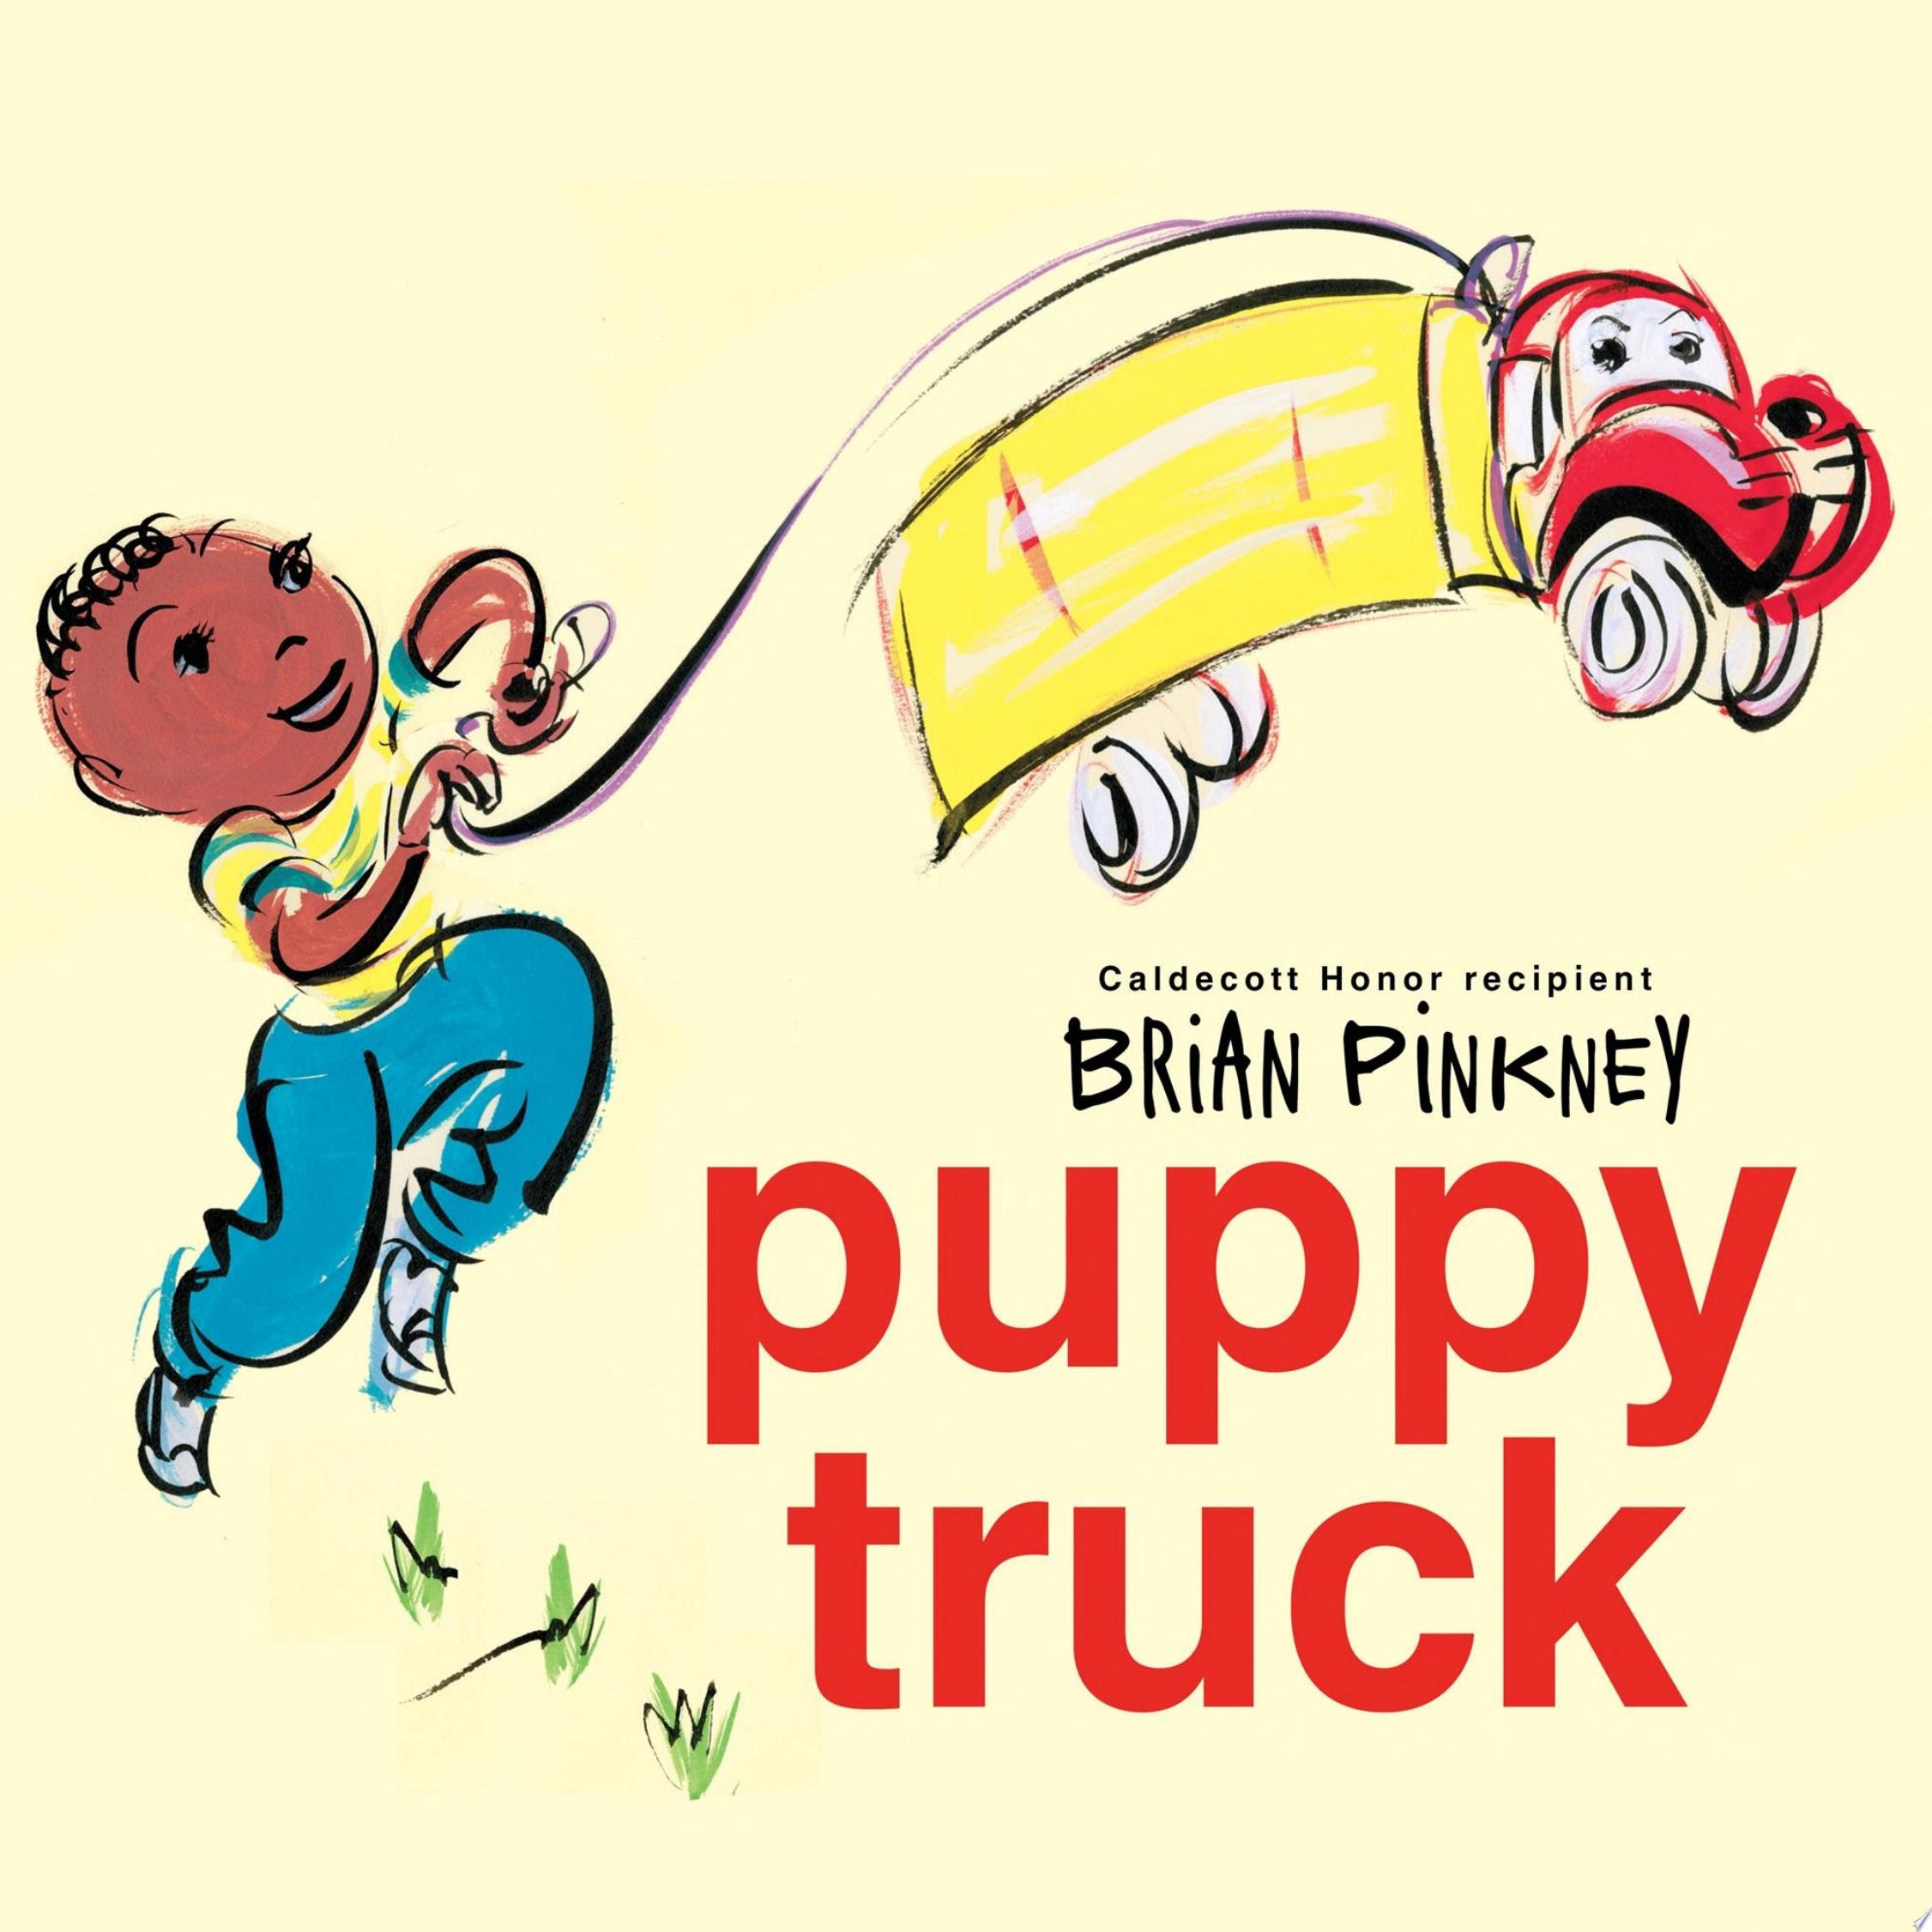 Image for "Puppy Truck"